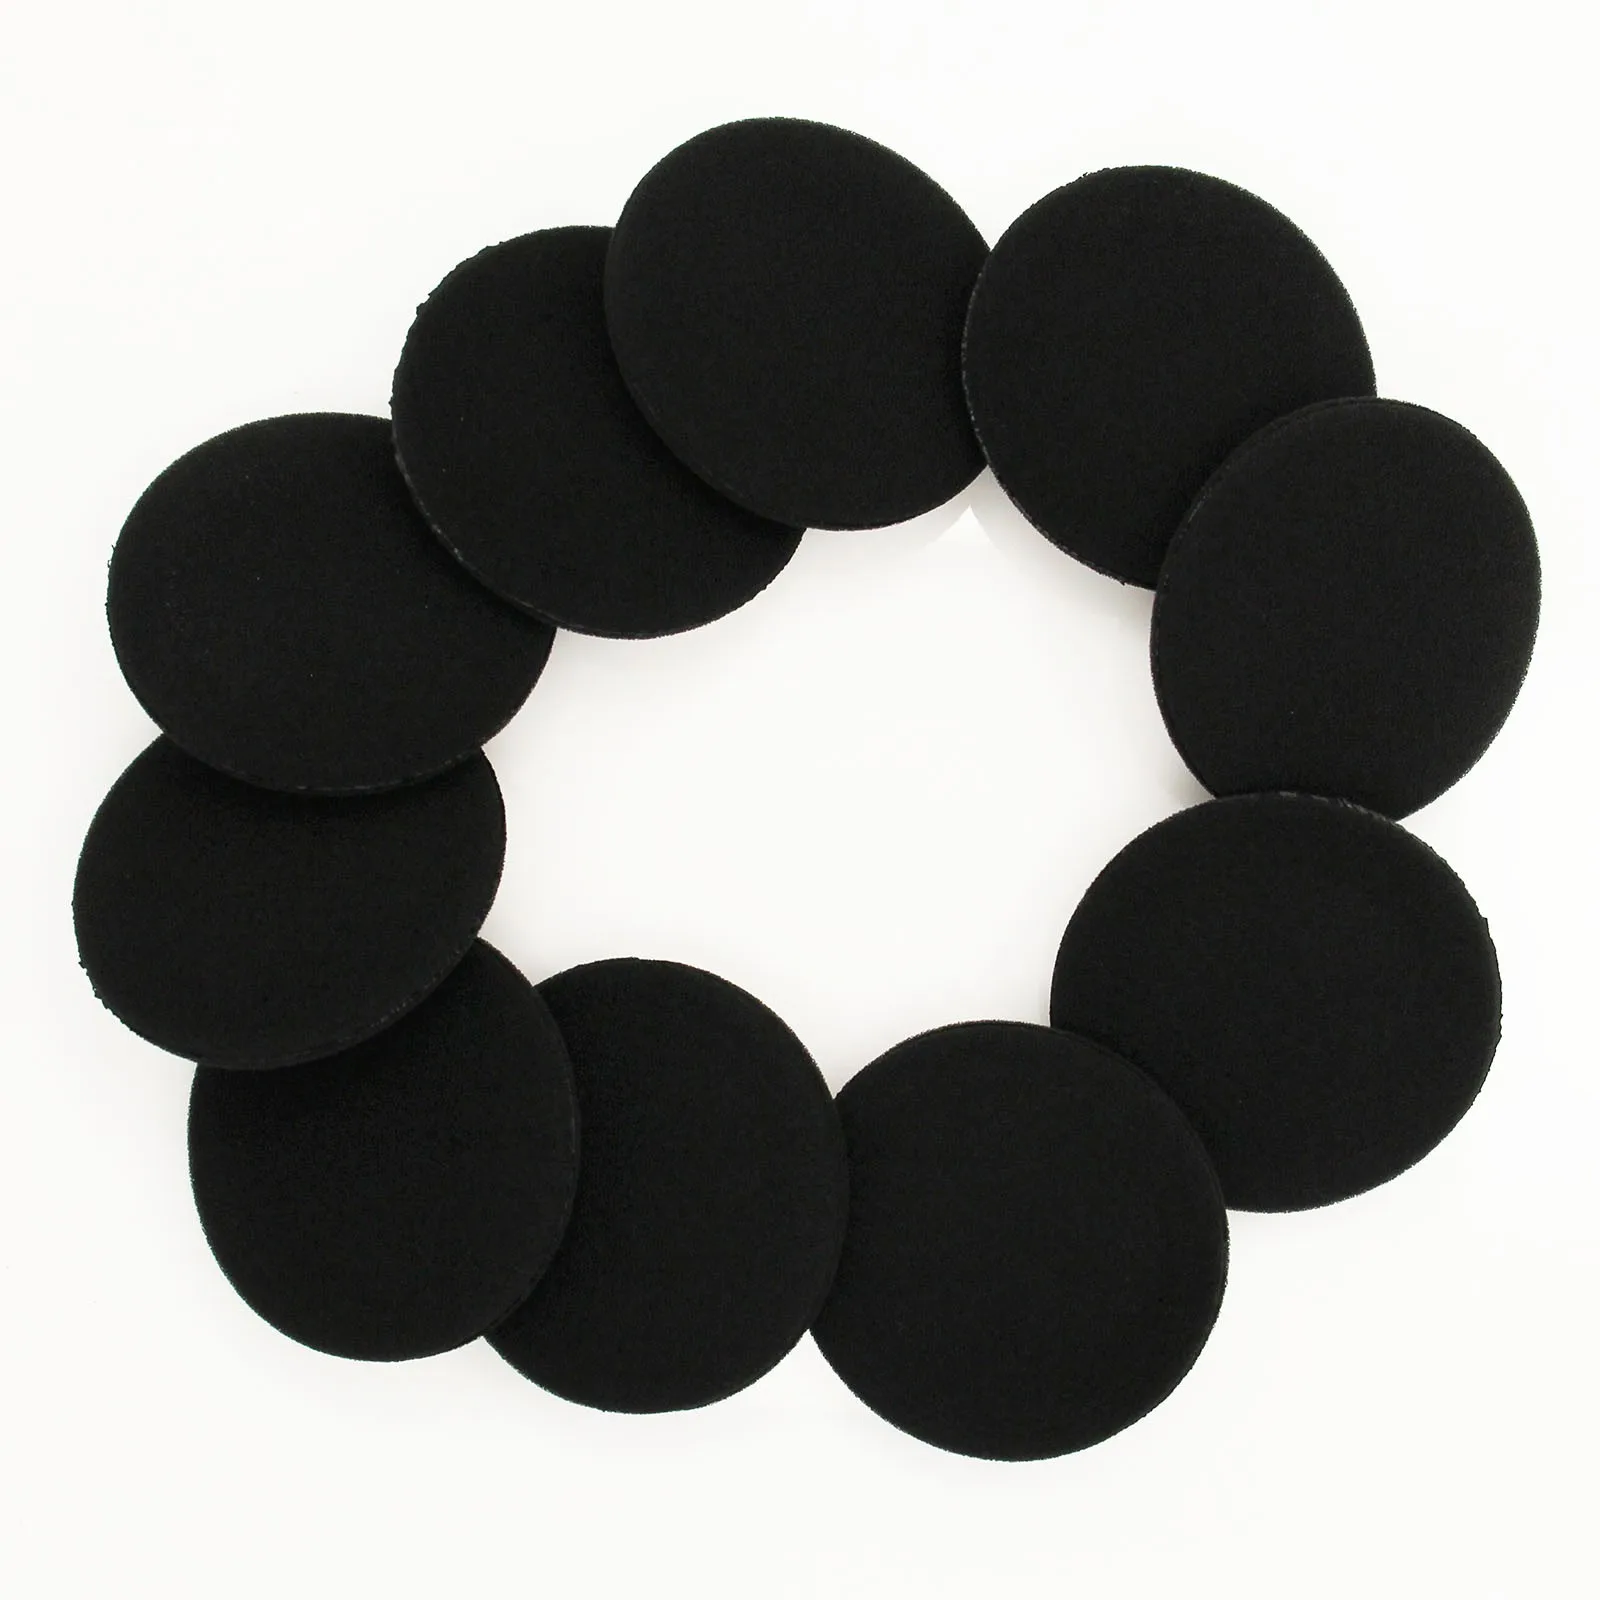 

Free Shipping Replacement Headphone Ear Cushions Foam Ear Pads 55MM for Headsets